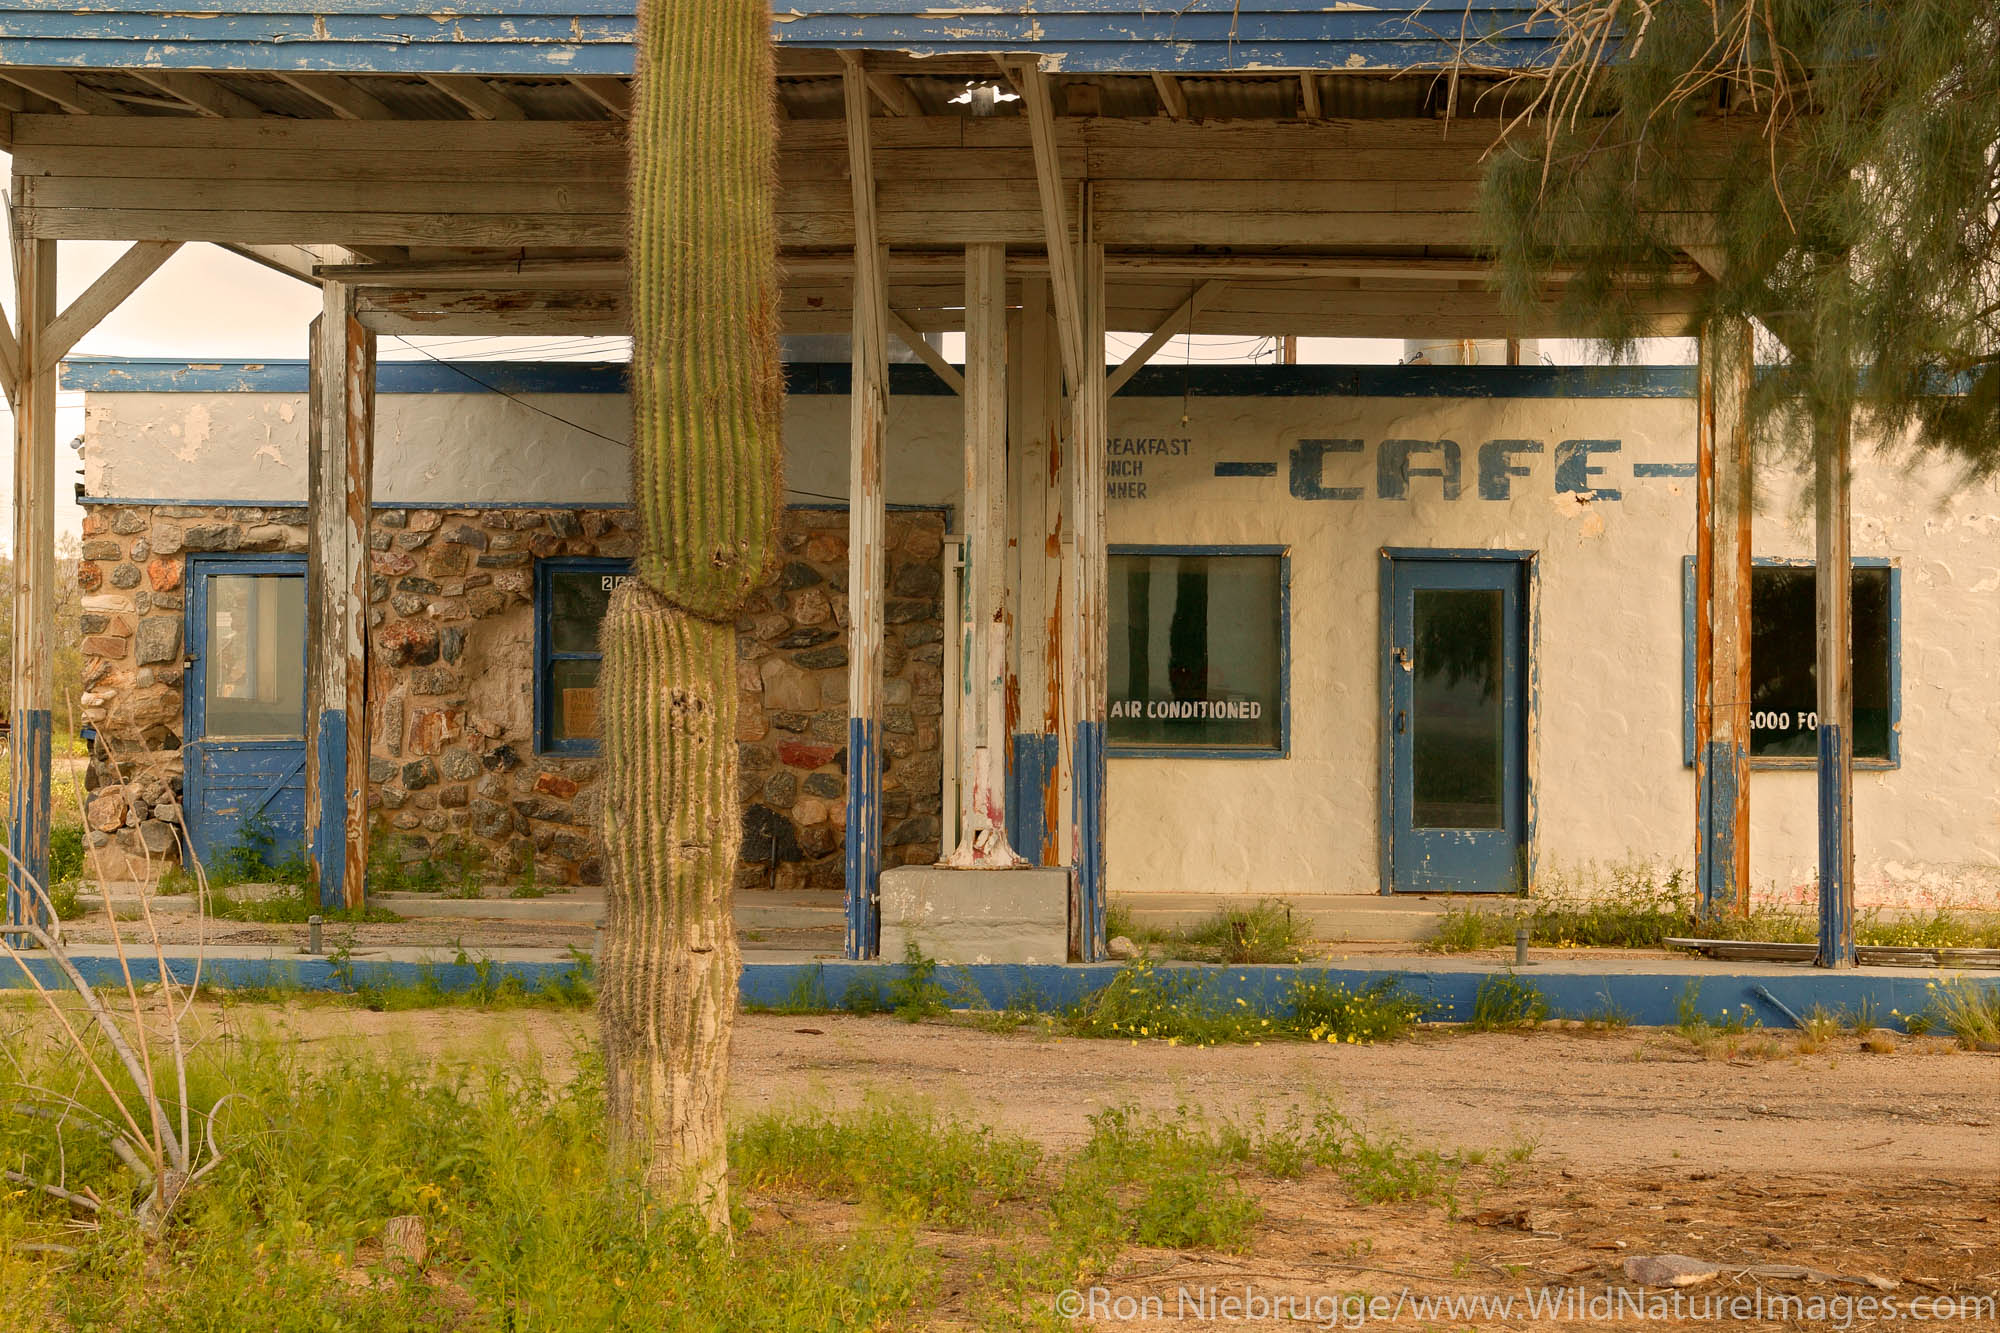 An old abandoned service station and cafe along Route 66, Essex, California.